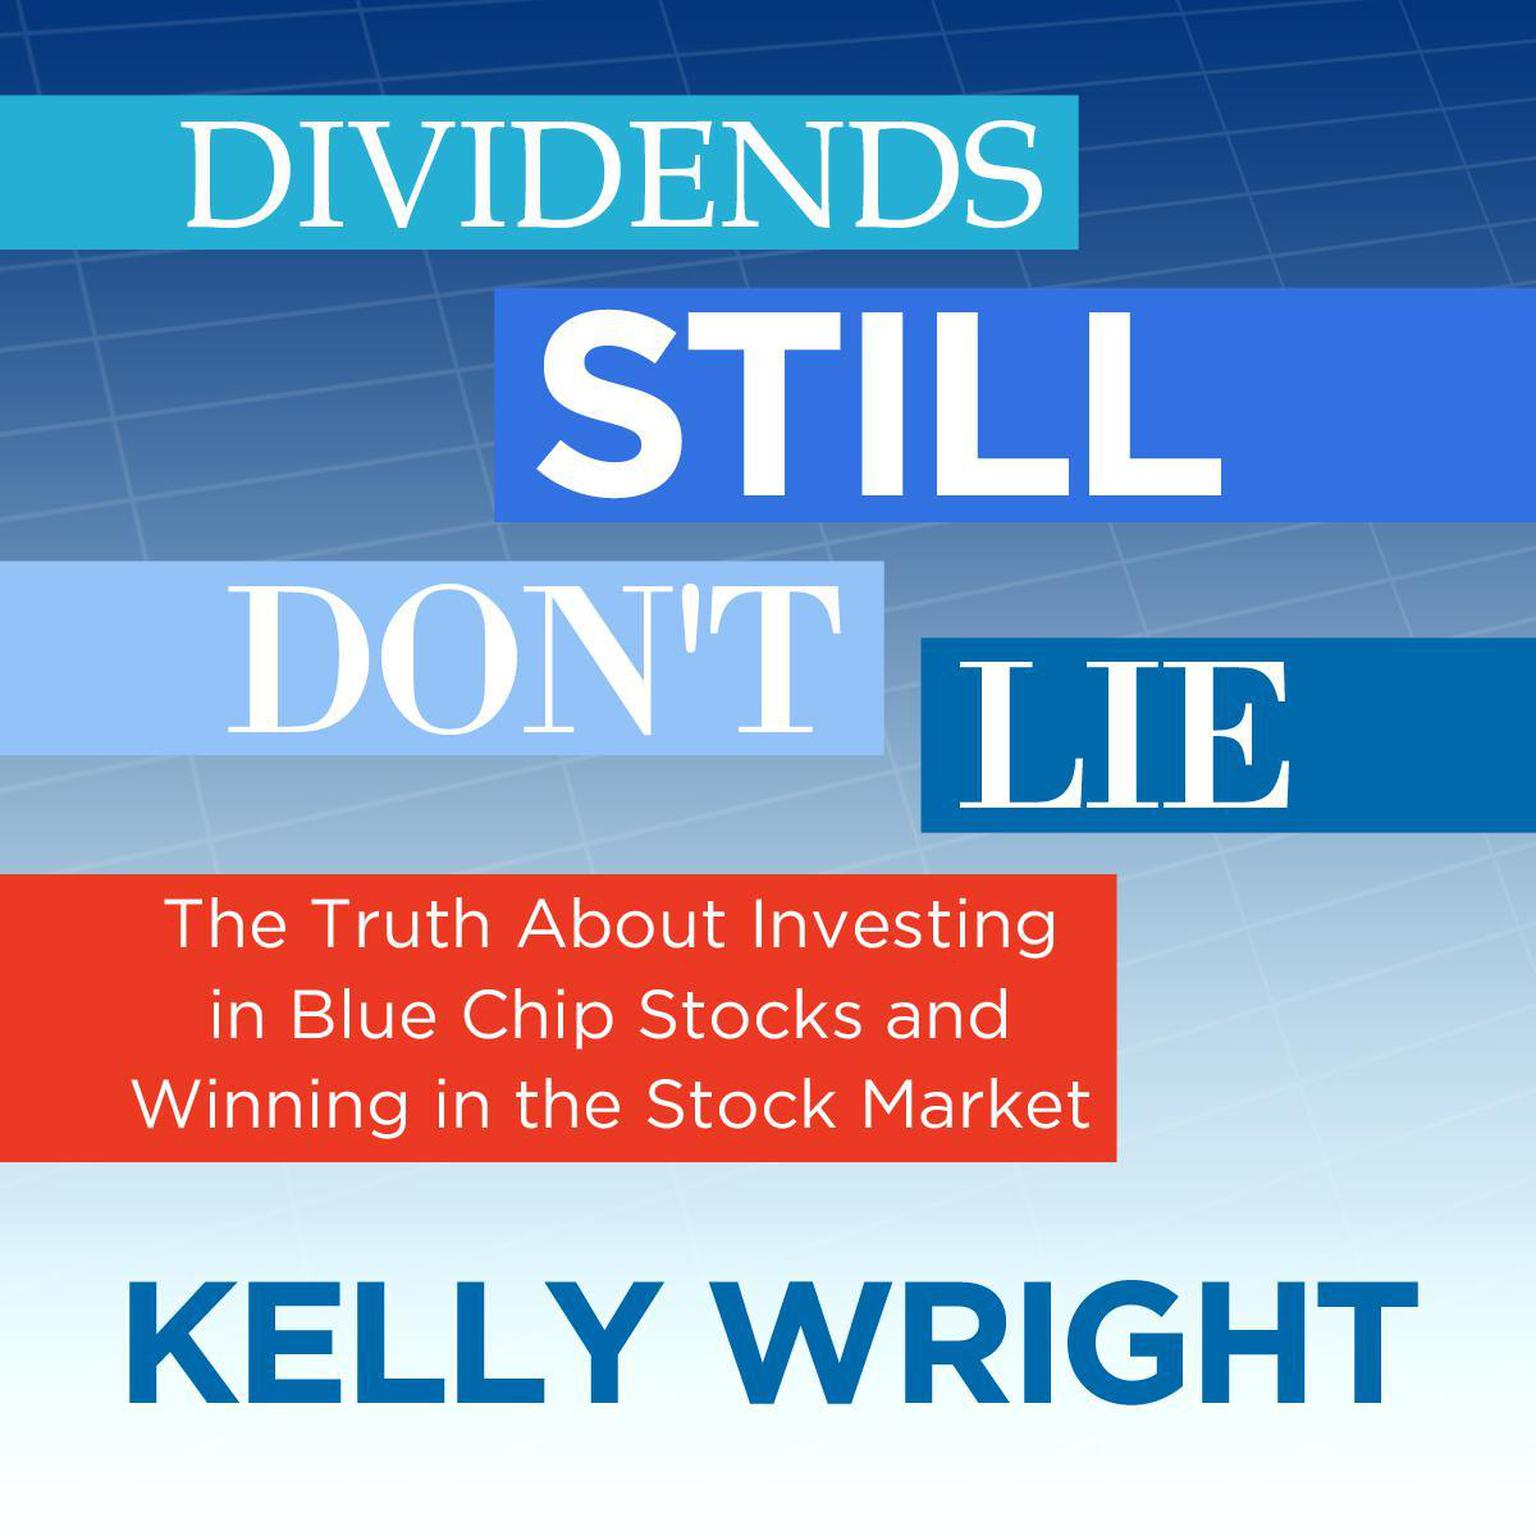 Dividends Still Dont Lie: The Truth About Investing in Blue Chip Stocks and Winning in the Stock Market Audiobook, by Kelley Wright